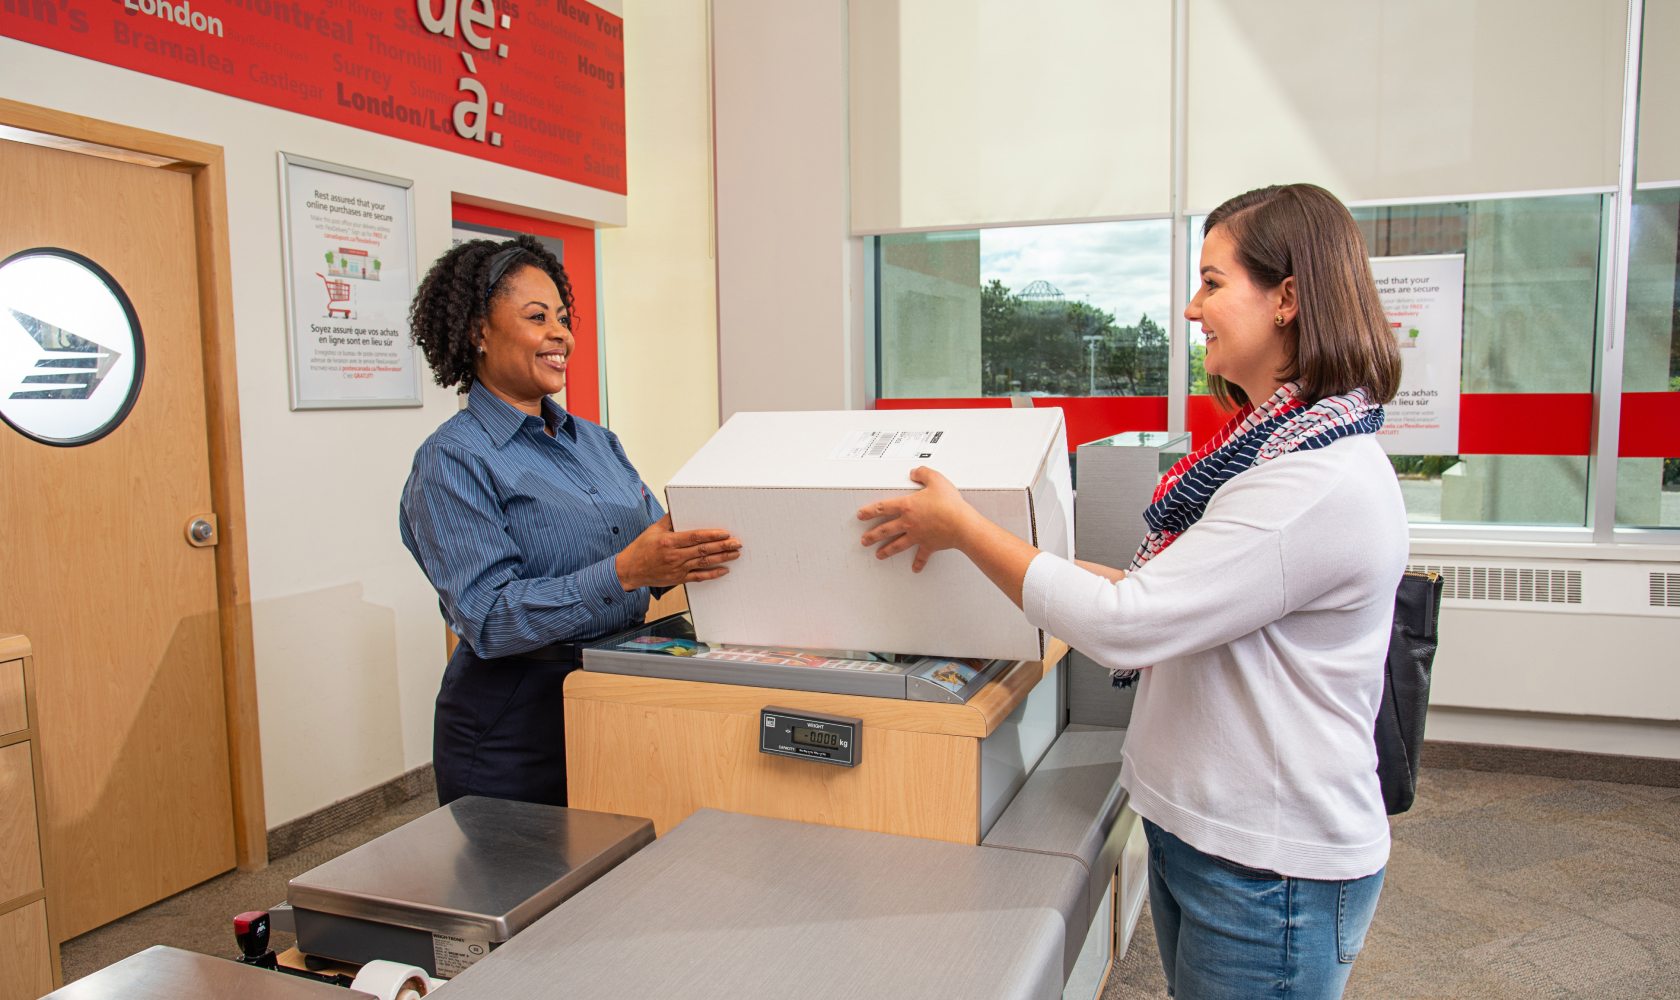 A smiling Canada Post employee hands a package to a smiling customer at a post office.